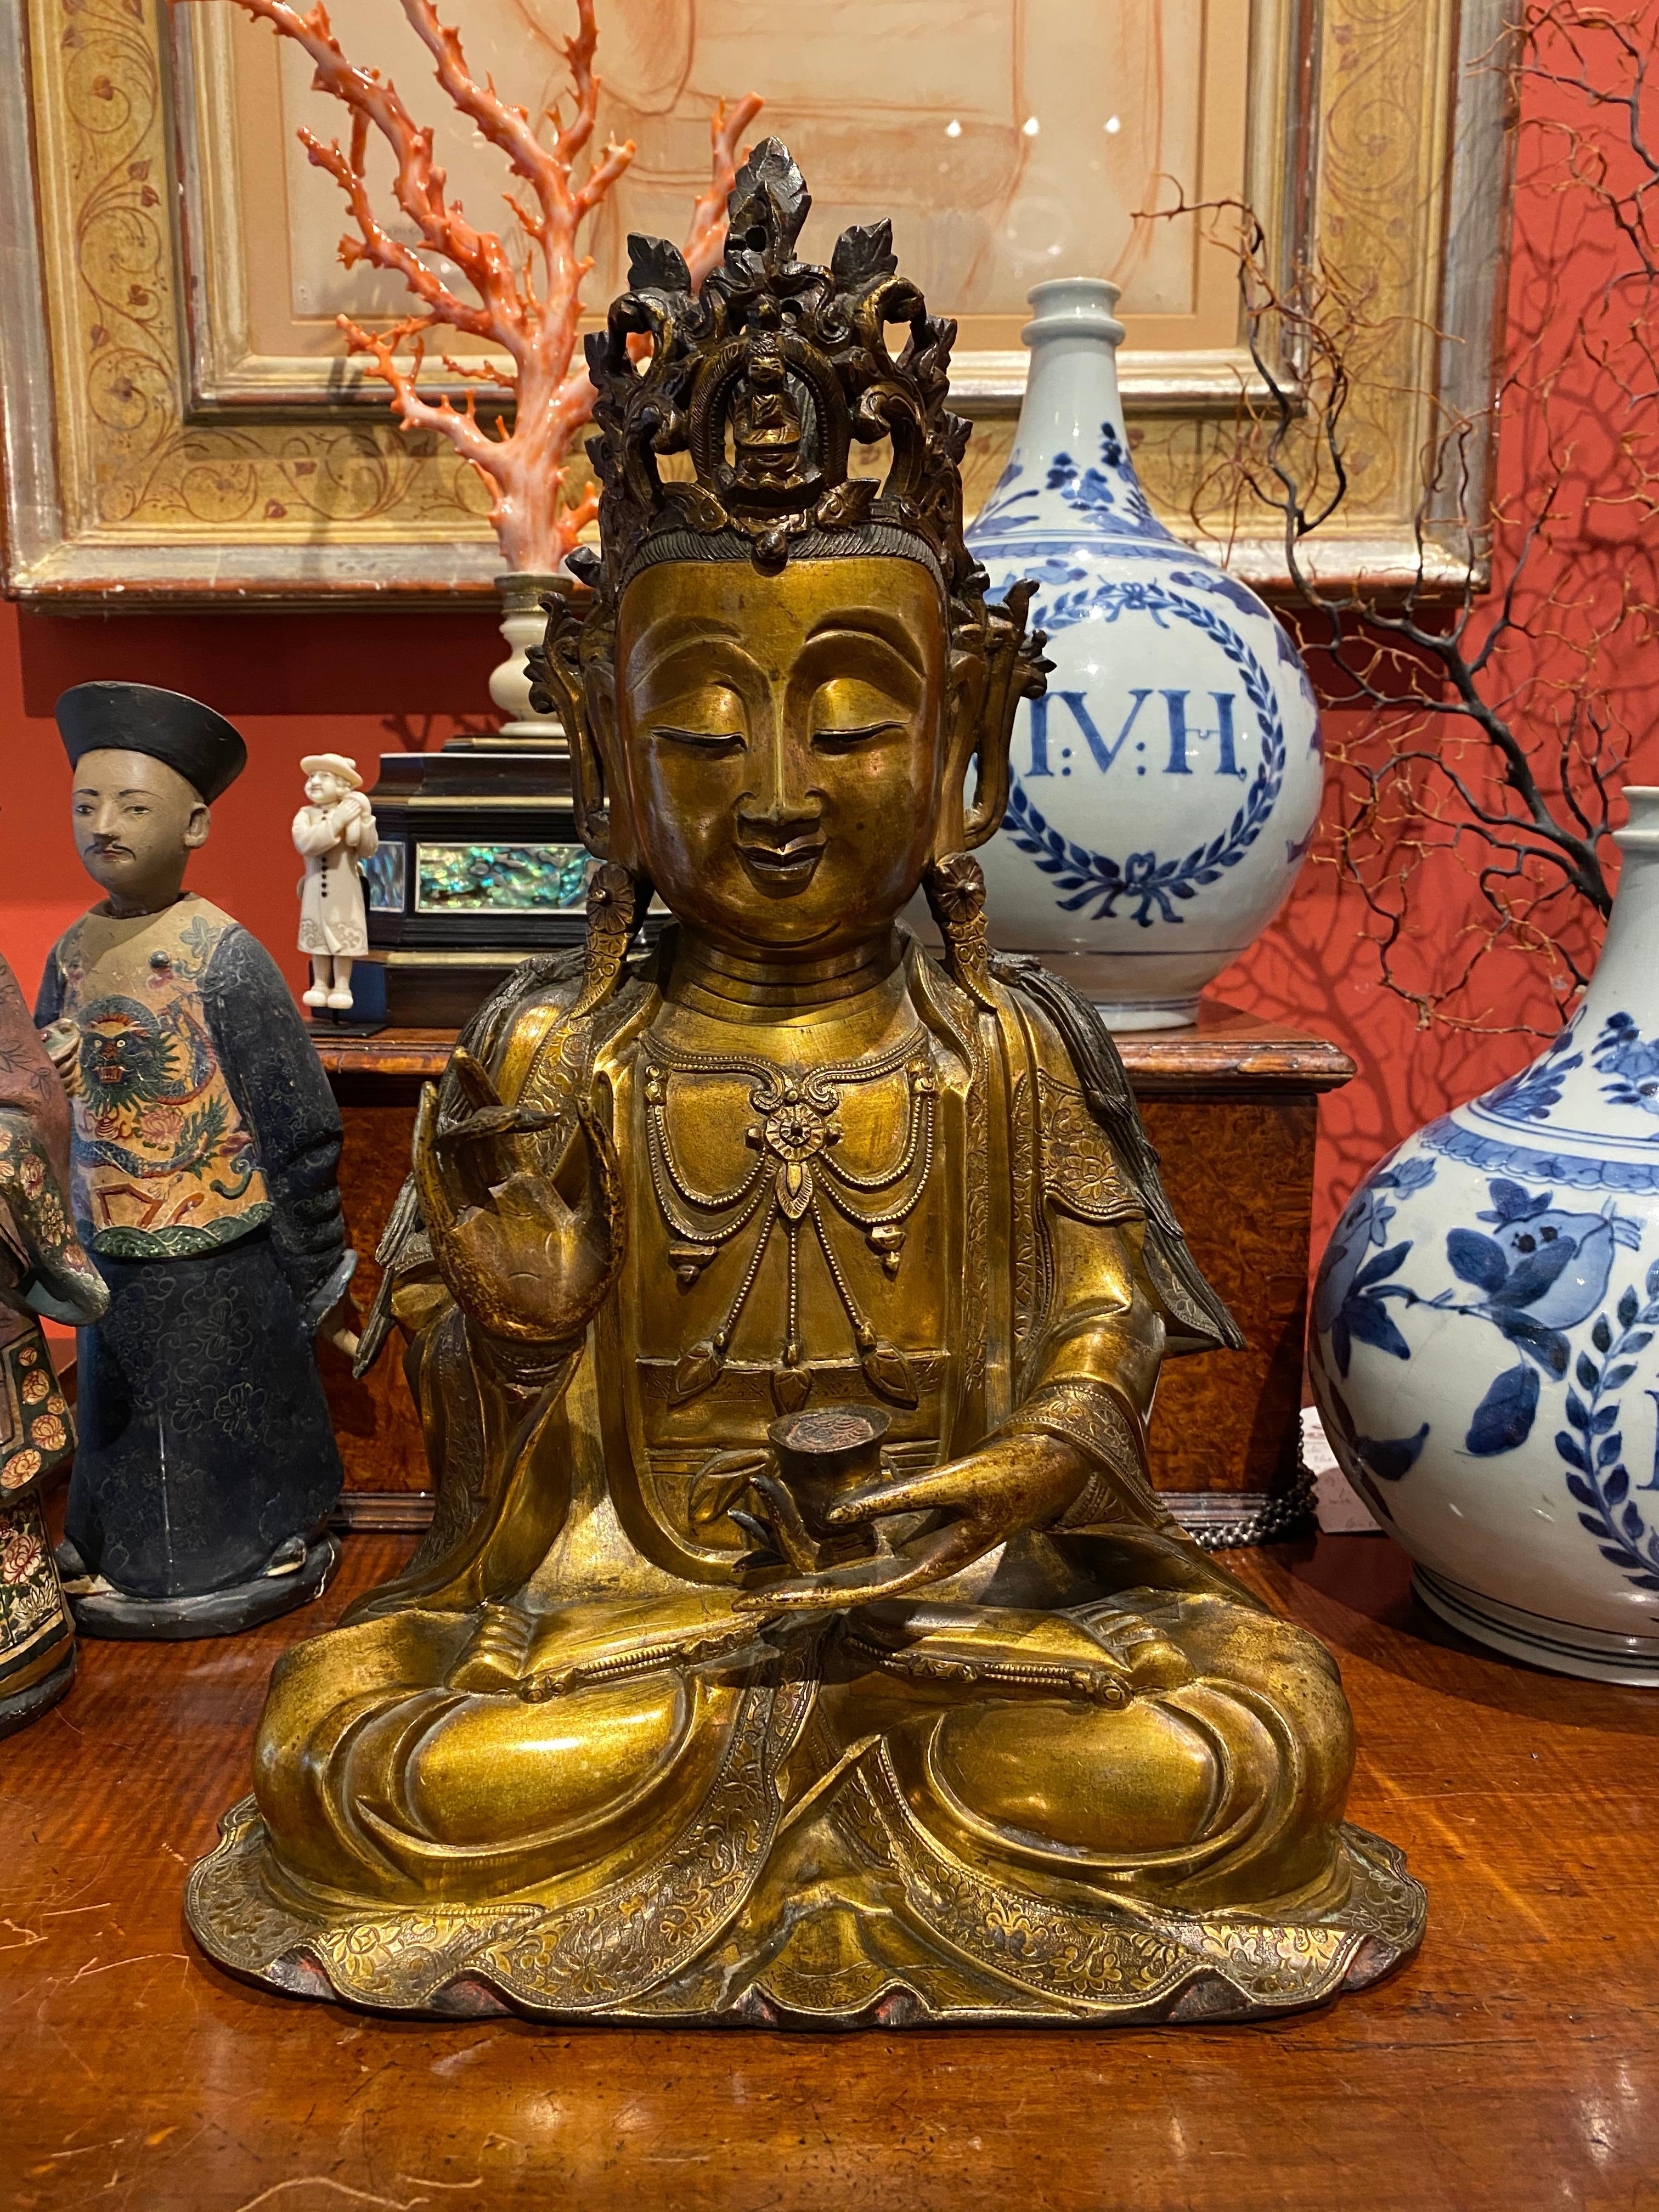 A very fine Chinese gilt bronze figure of Guanyin

Ming dynasty, late 16th-early 17th century

The deity seated in padmasana, the right hand raised in Karana mudra and the left holding a cup, dressed in long robes decorated with flowers at the